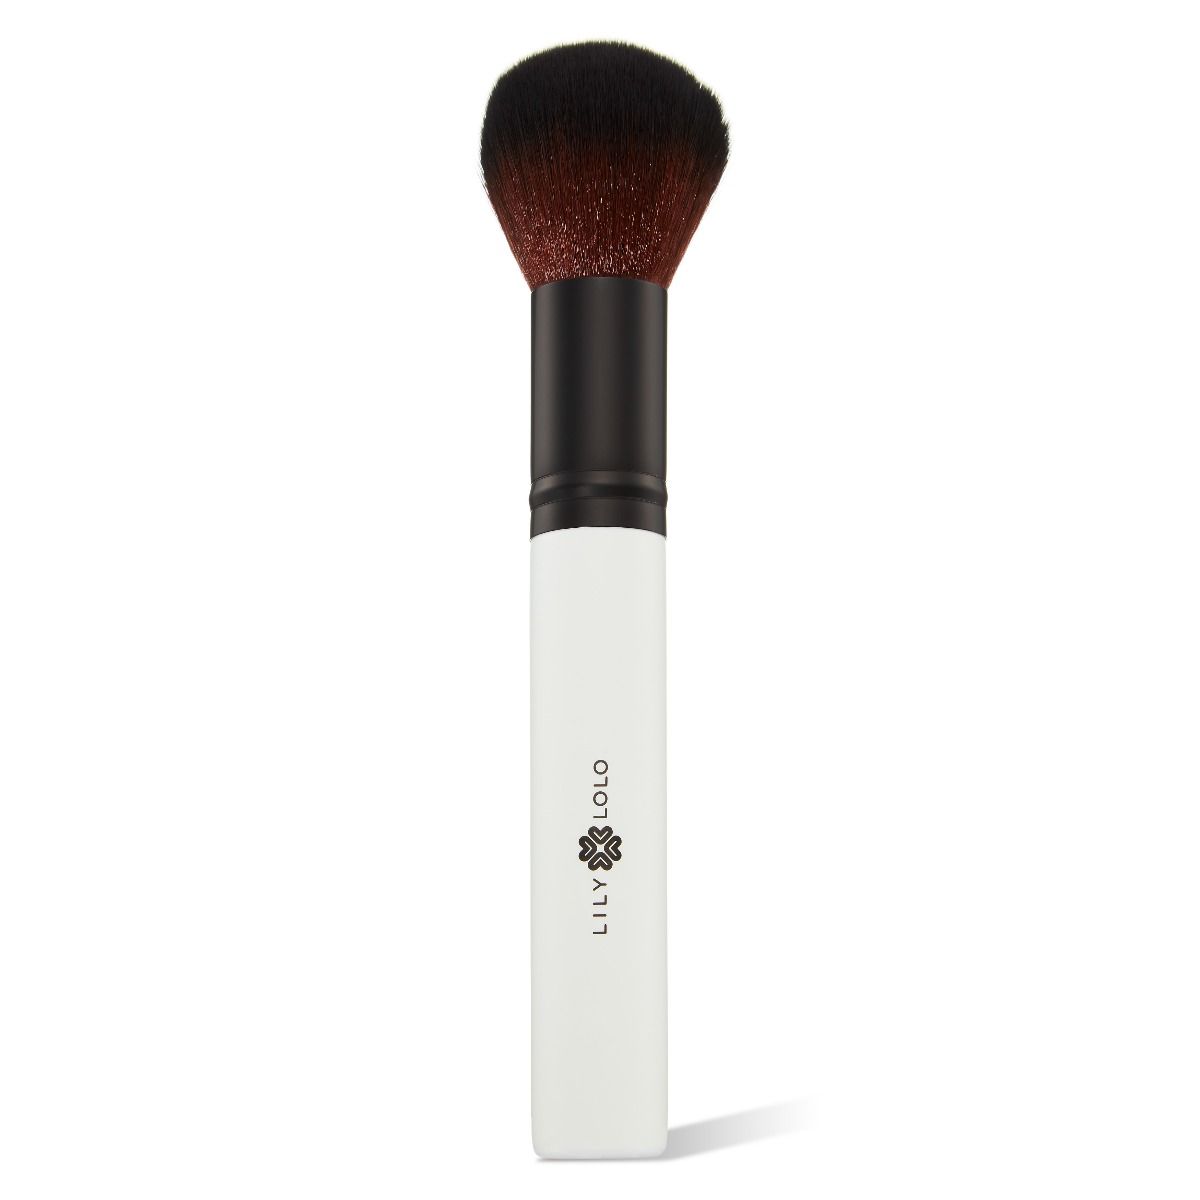 Lily Lolo Bronzer Brush: Beautifully soft Small Powder Brush, perfect for applying Lily Lolo bronzers.